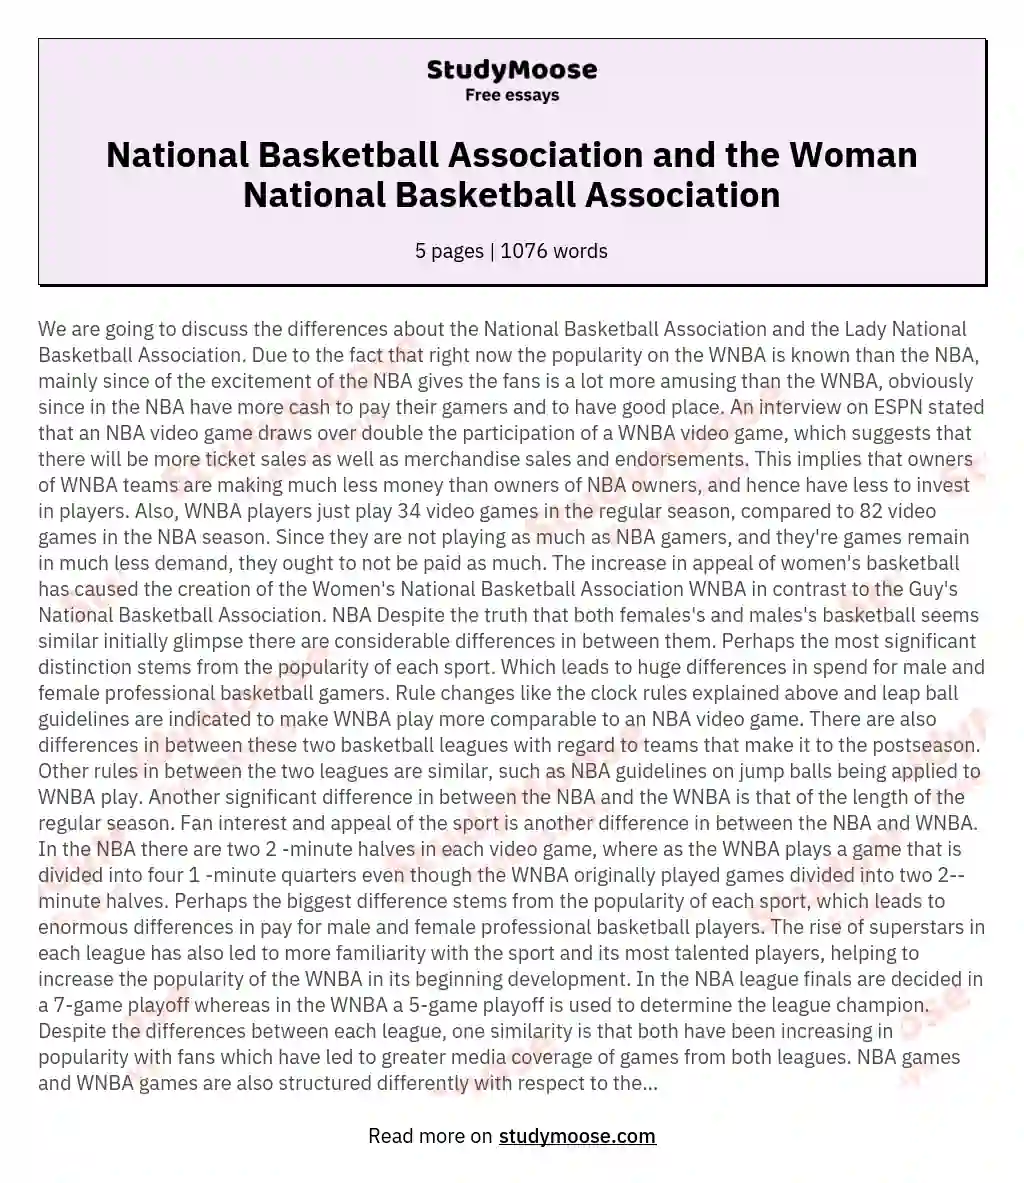 National Basketball Association and the Woman National Basketball Association